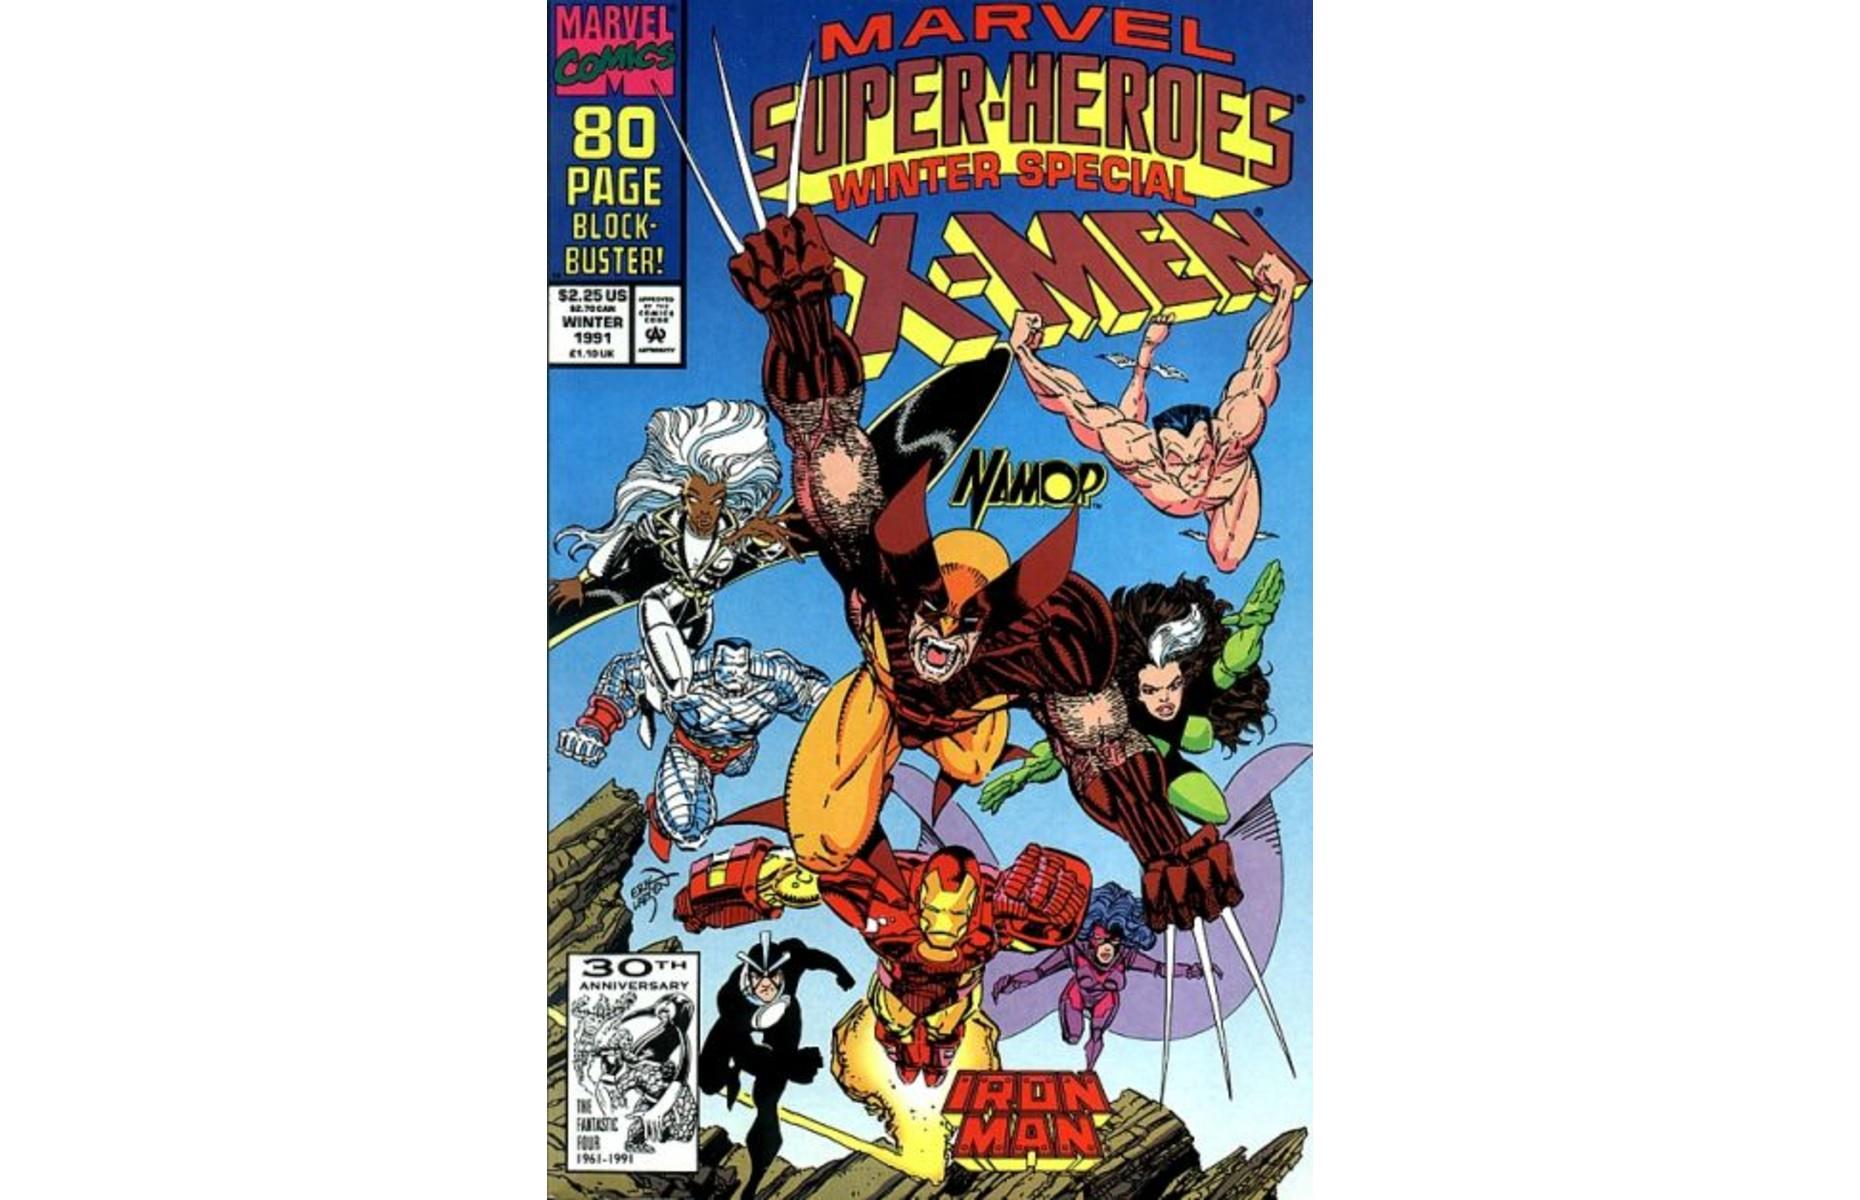 Marvel Super Heroes #8: up to £286 ($375)